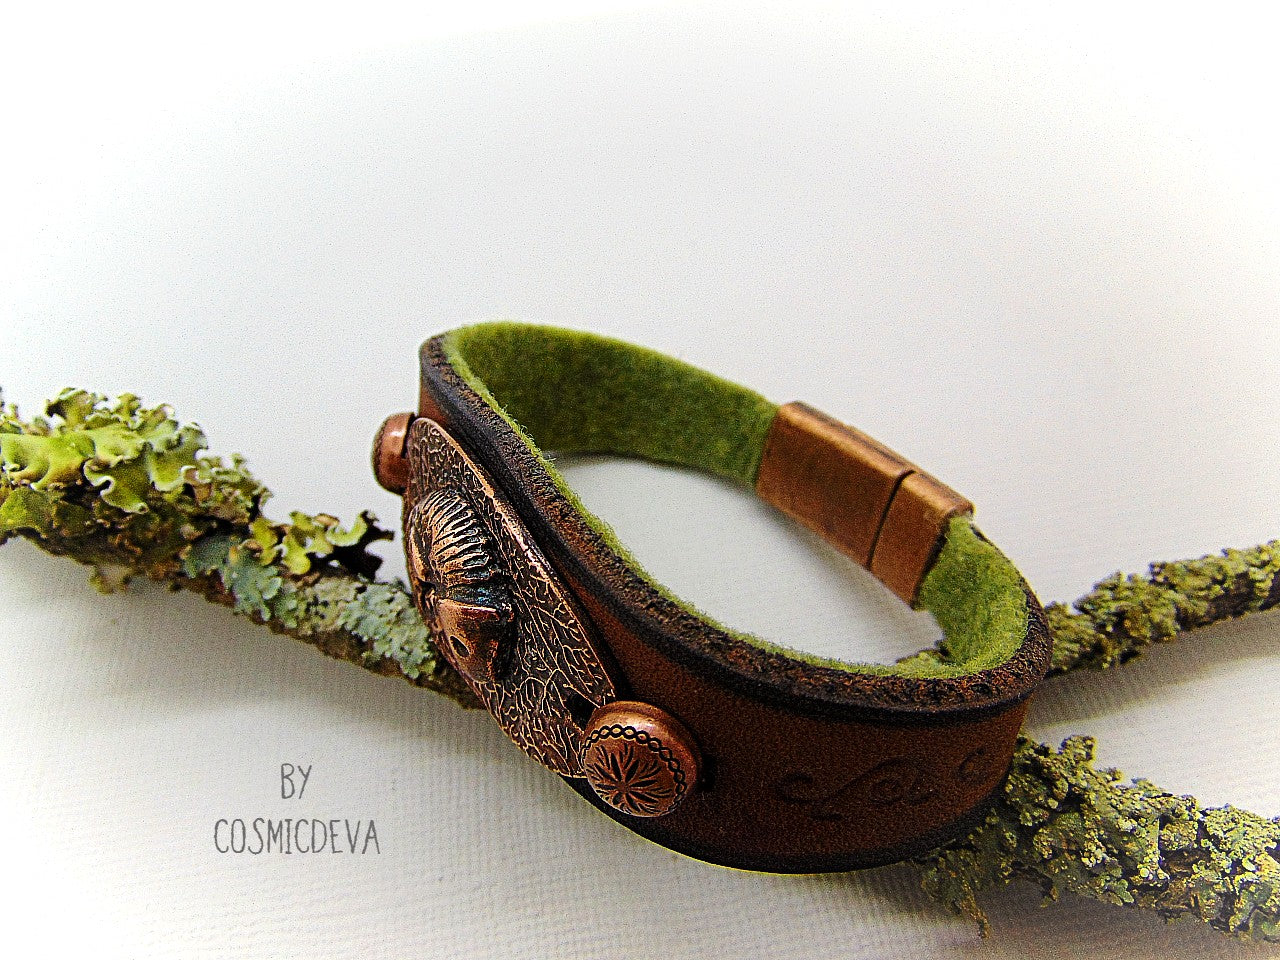 Unique handcrafted leather bracelet made of earthy brown dyed veg tan leather. The focal point is a hand sculptured solid copper chameleon on a textured solid copper base. The inside of the leather bracelet is lined with olive green felt for your comfort.